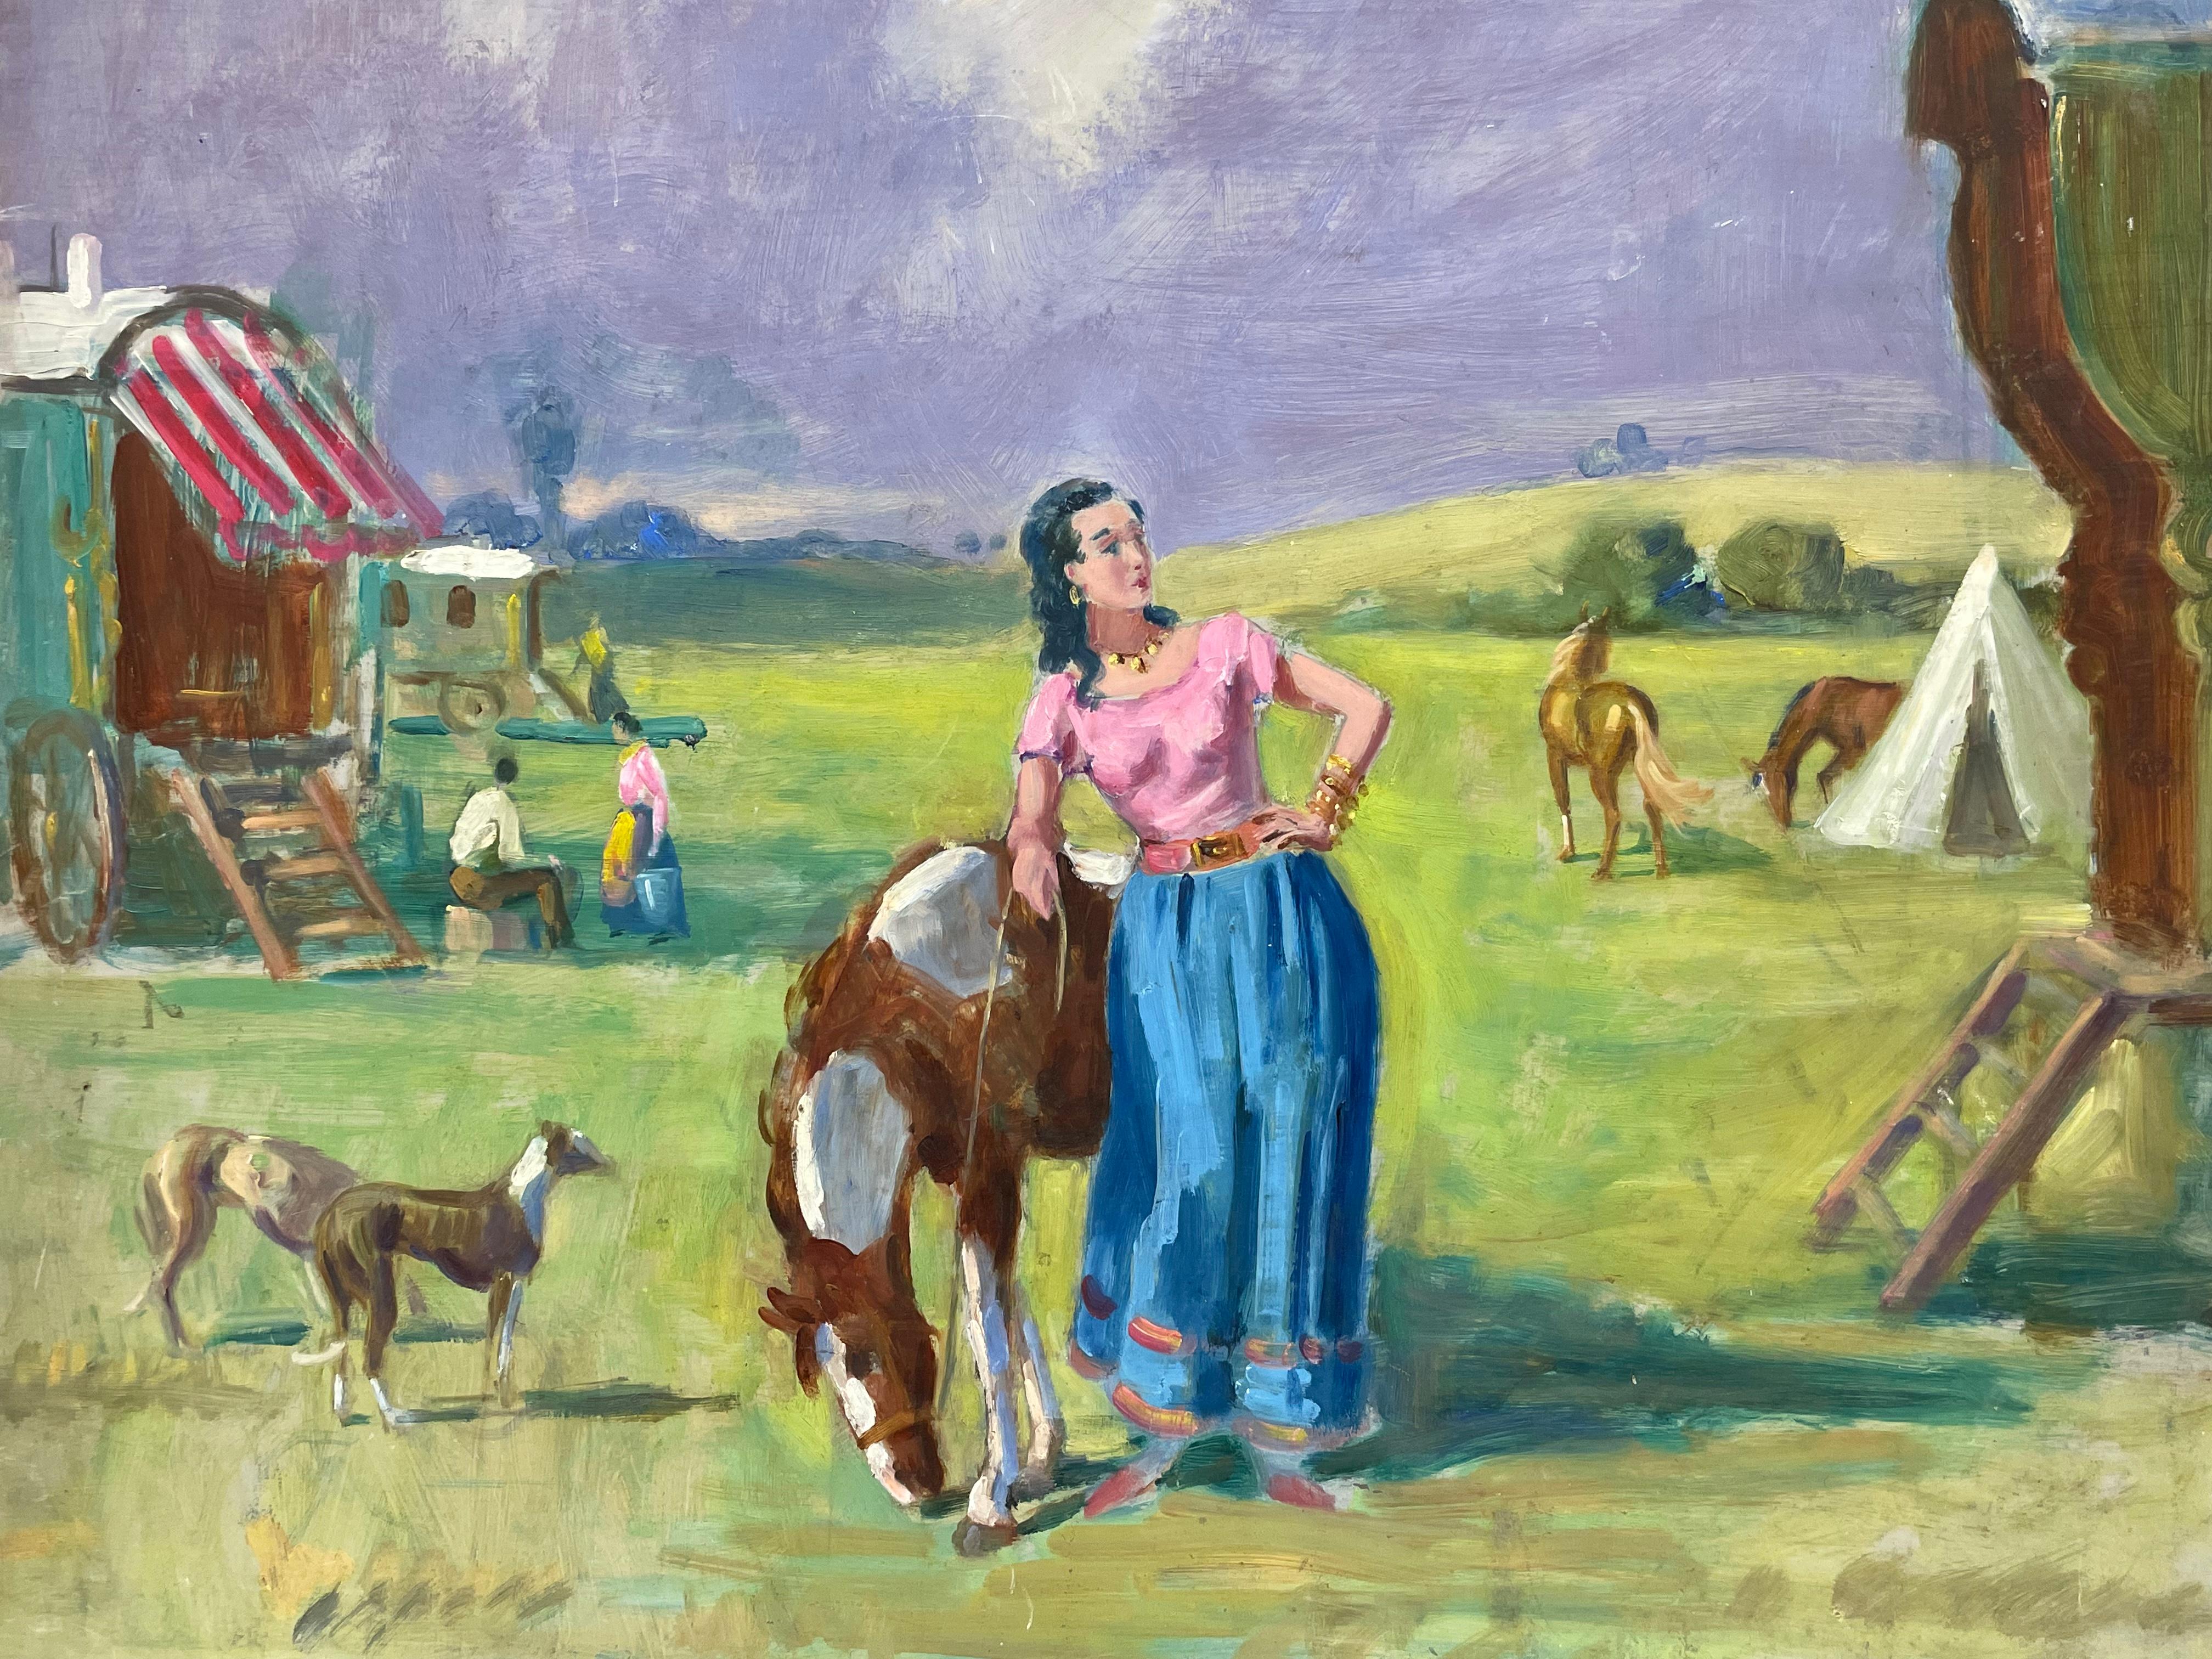 1950's English Oil Travelers outside Gypsy Caravans with Horses in Landscape - Impressionist Painting by English Mid Century